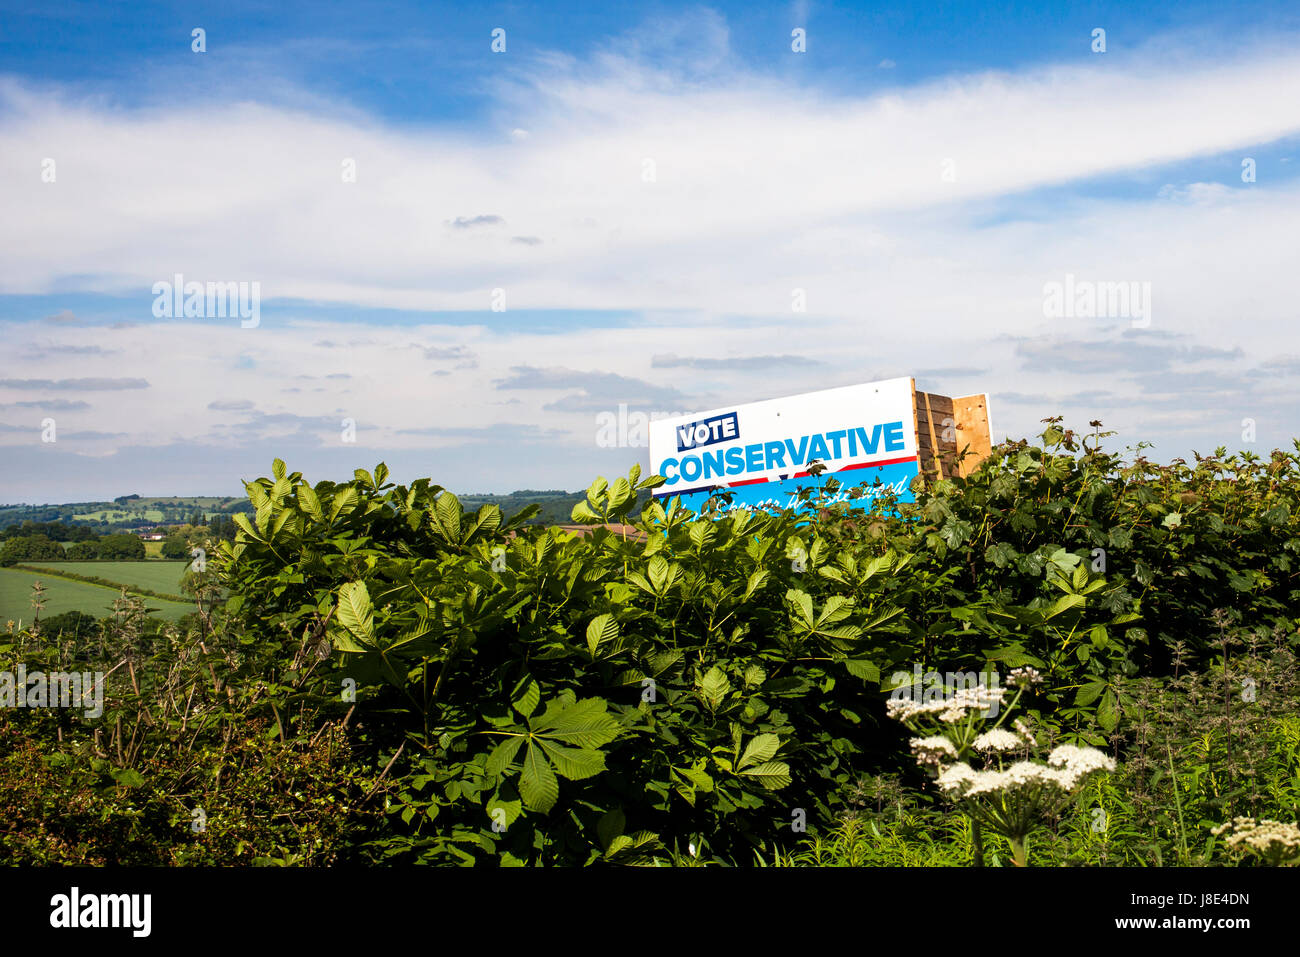 Bank Hill, Woodborough, Nottinghamshire. 28th May 2017. With less than two weeks until the UK General Election on Thursday 8th June, a Vote Conservative sign is seen on farmland near the Nottinghamshire village of Woodborogh. Credit: Mark Richardson/Alamy Live News Stock Photo